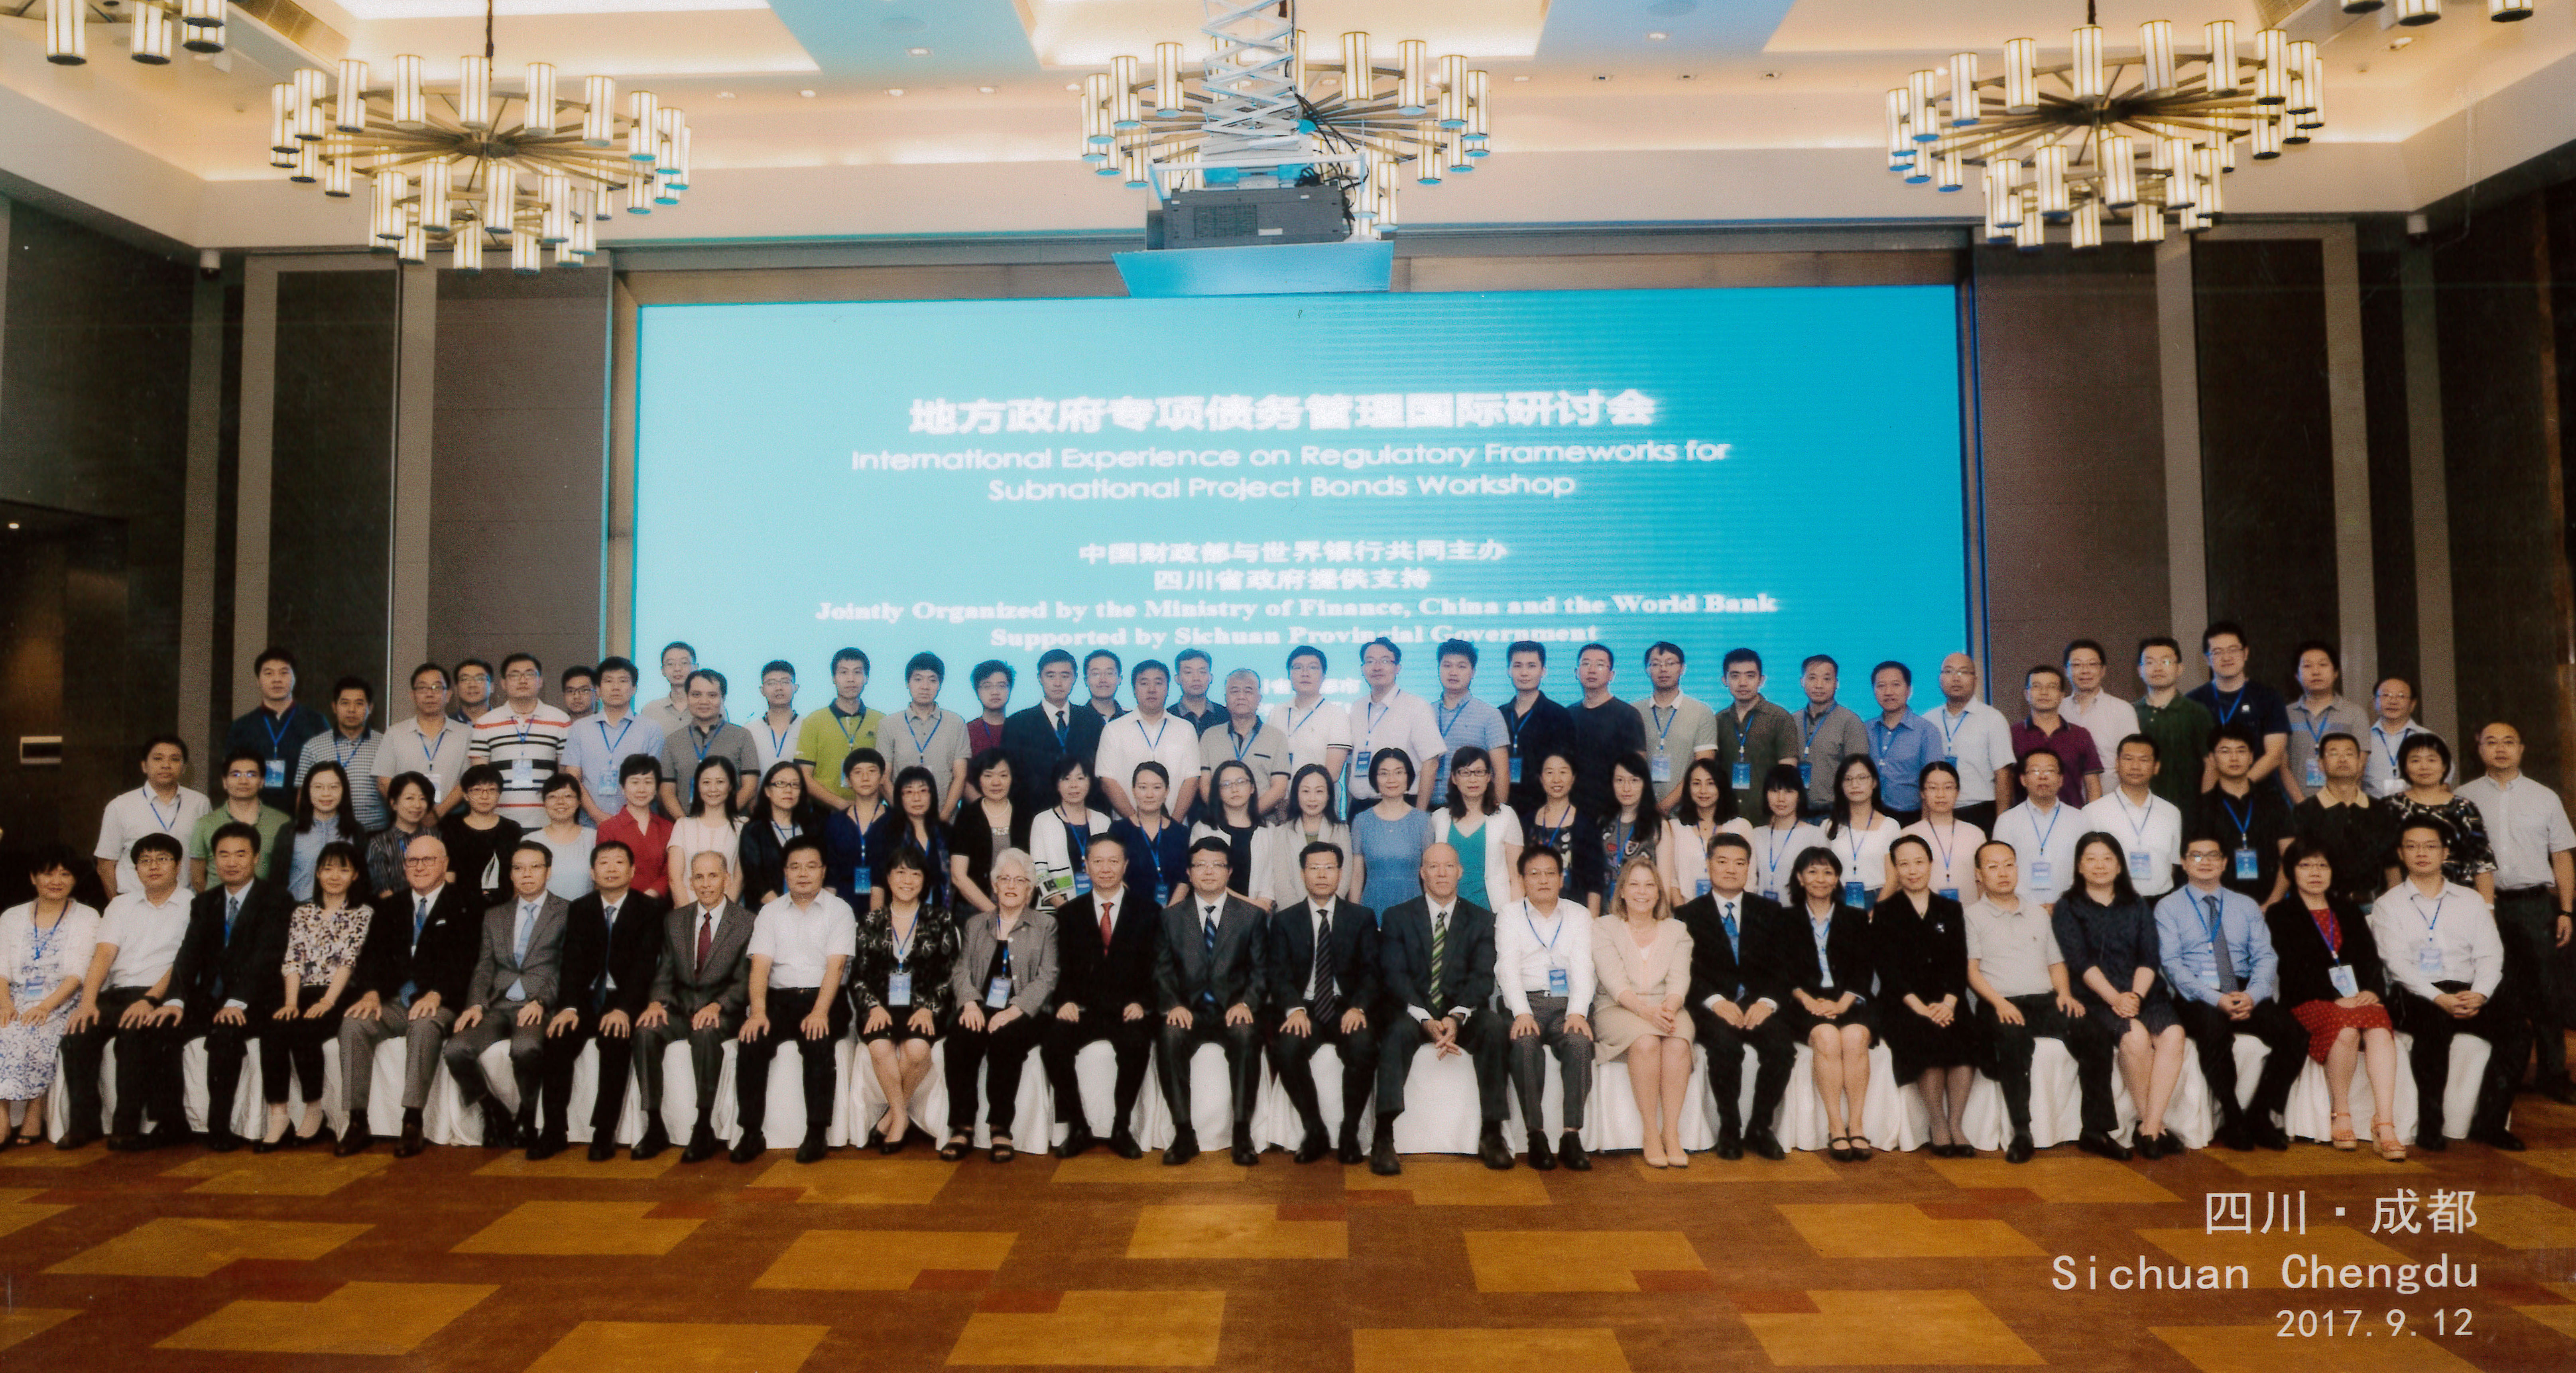 Conference presenters and attendees gathered in Chengdu, China, at the International Experience on Regulatory Framework for Subnational Project Bonds Workshop in September. (Bricmont pictured front row, 7th from right).